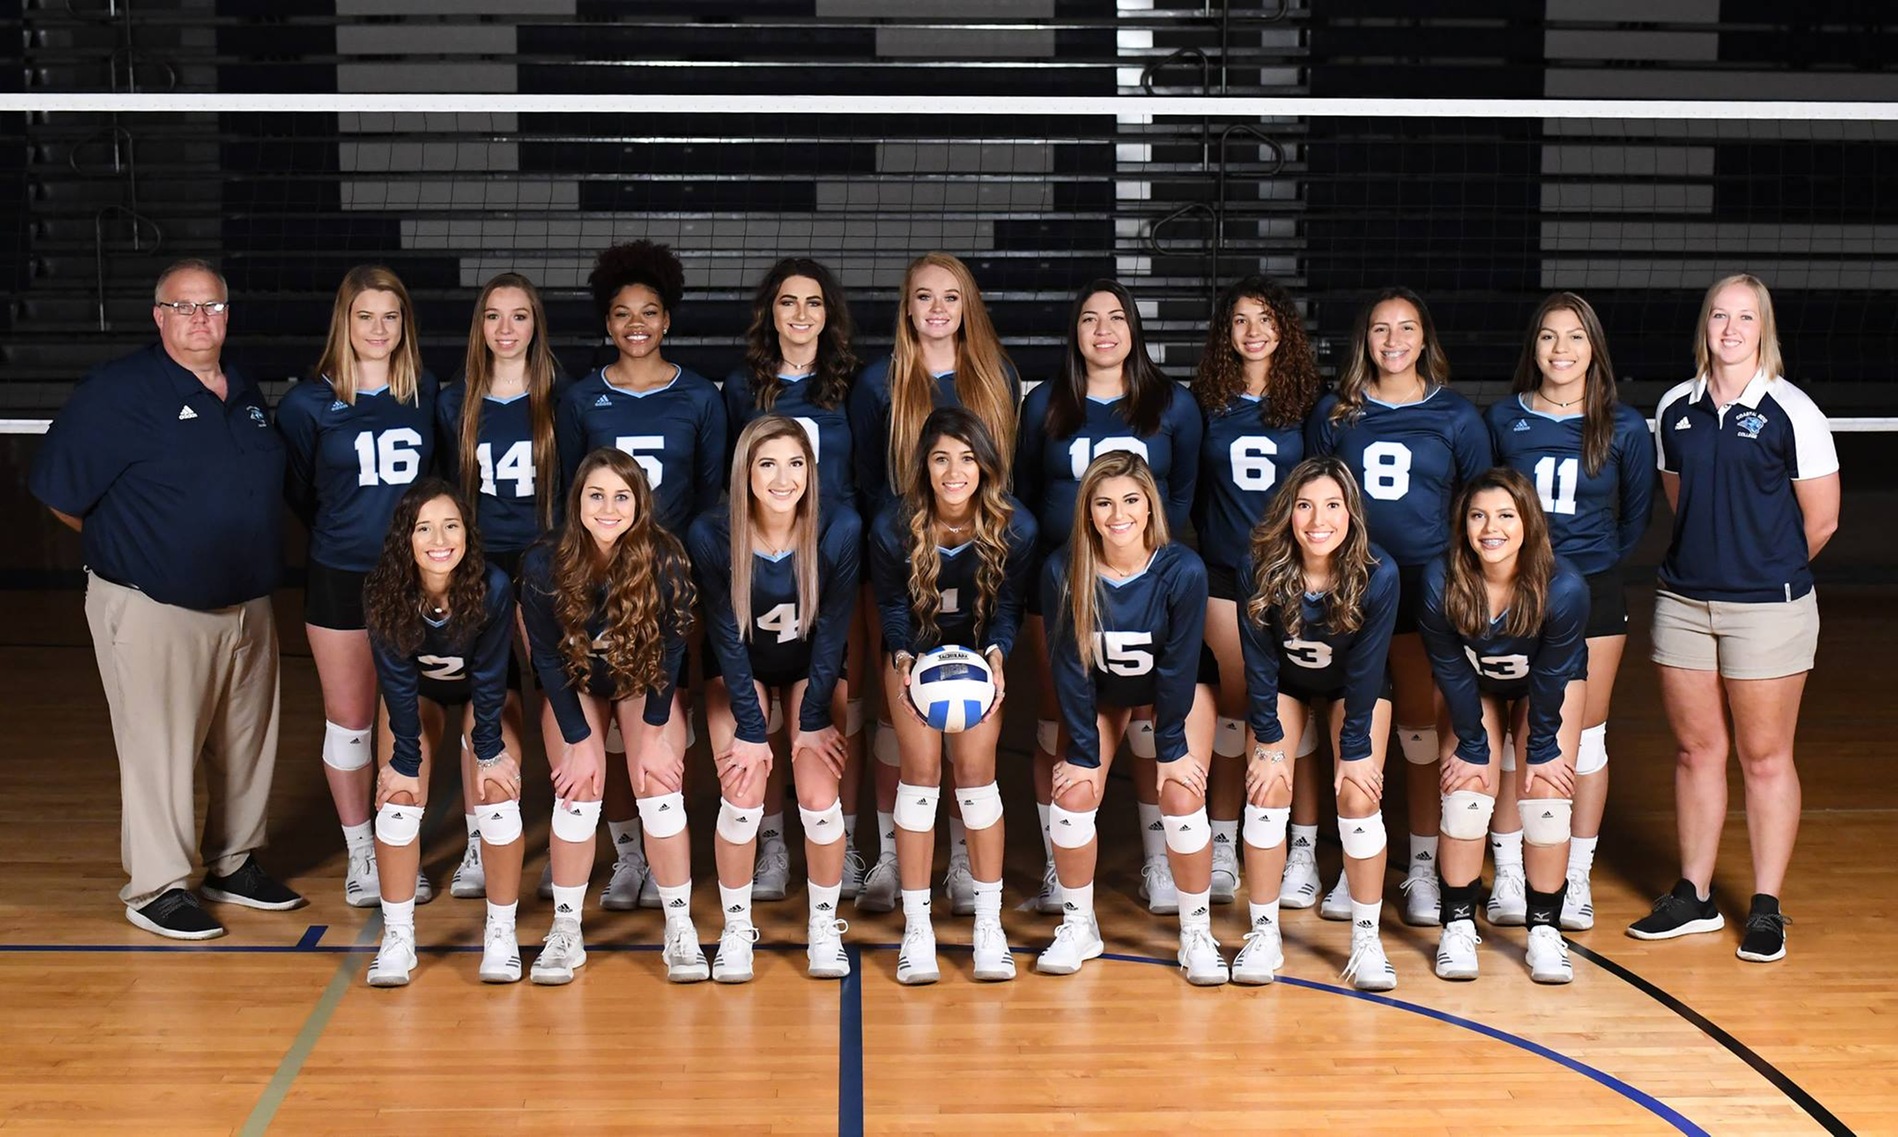 Volleyball Stretches Win Streak to Seven, Santos Named To All-Tournament Team